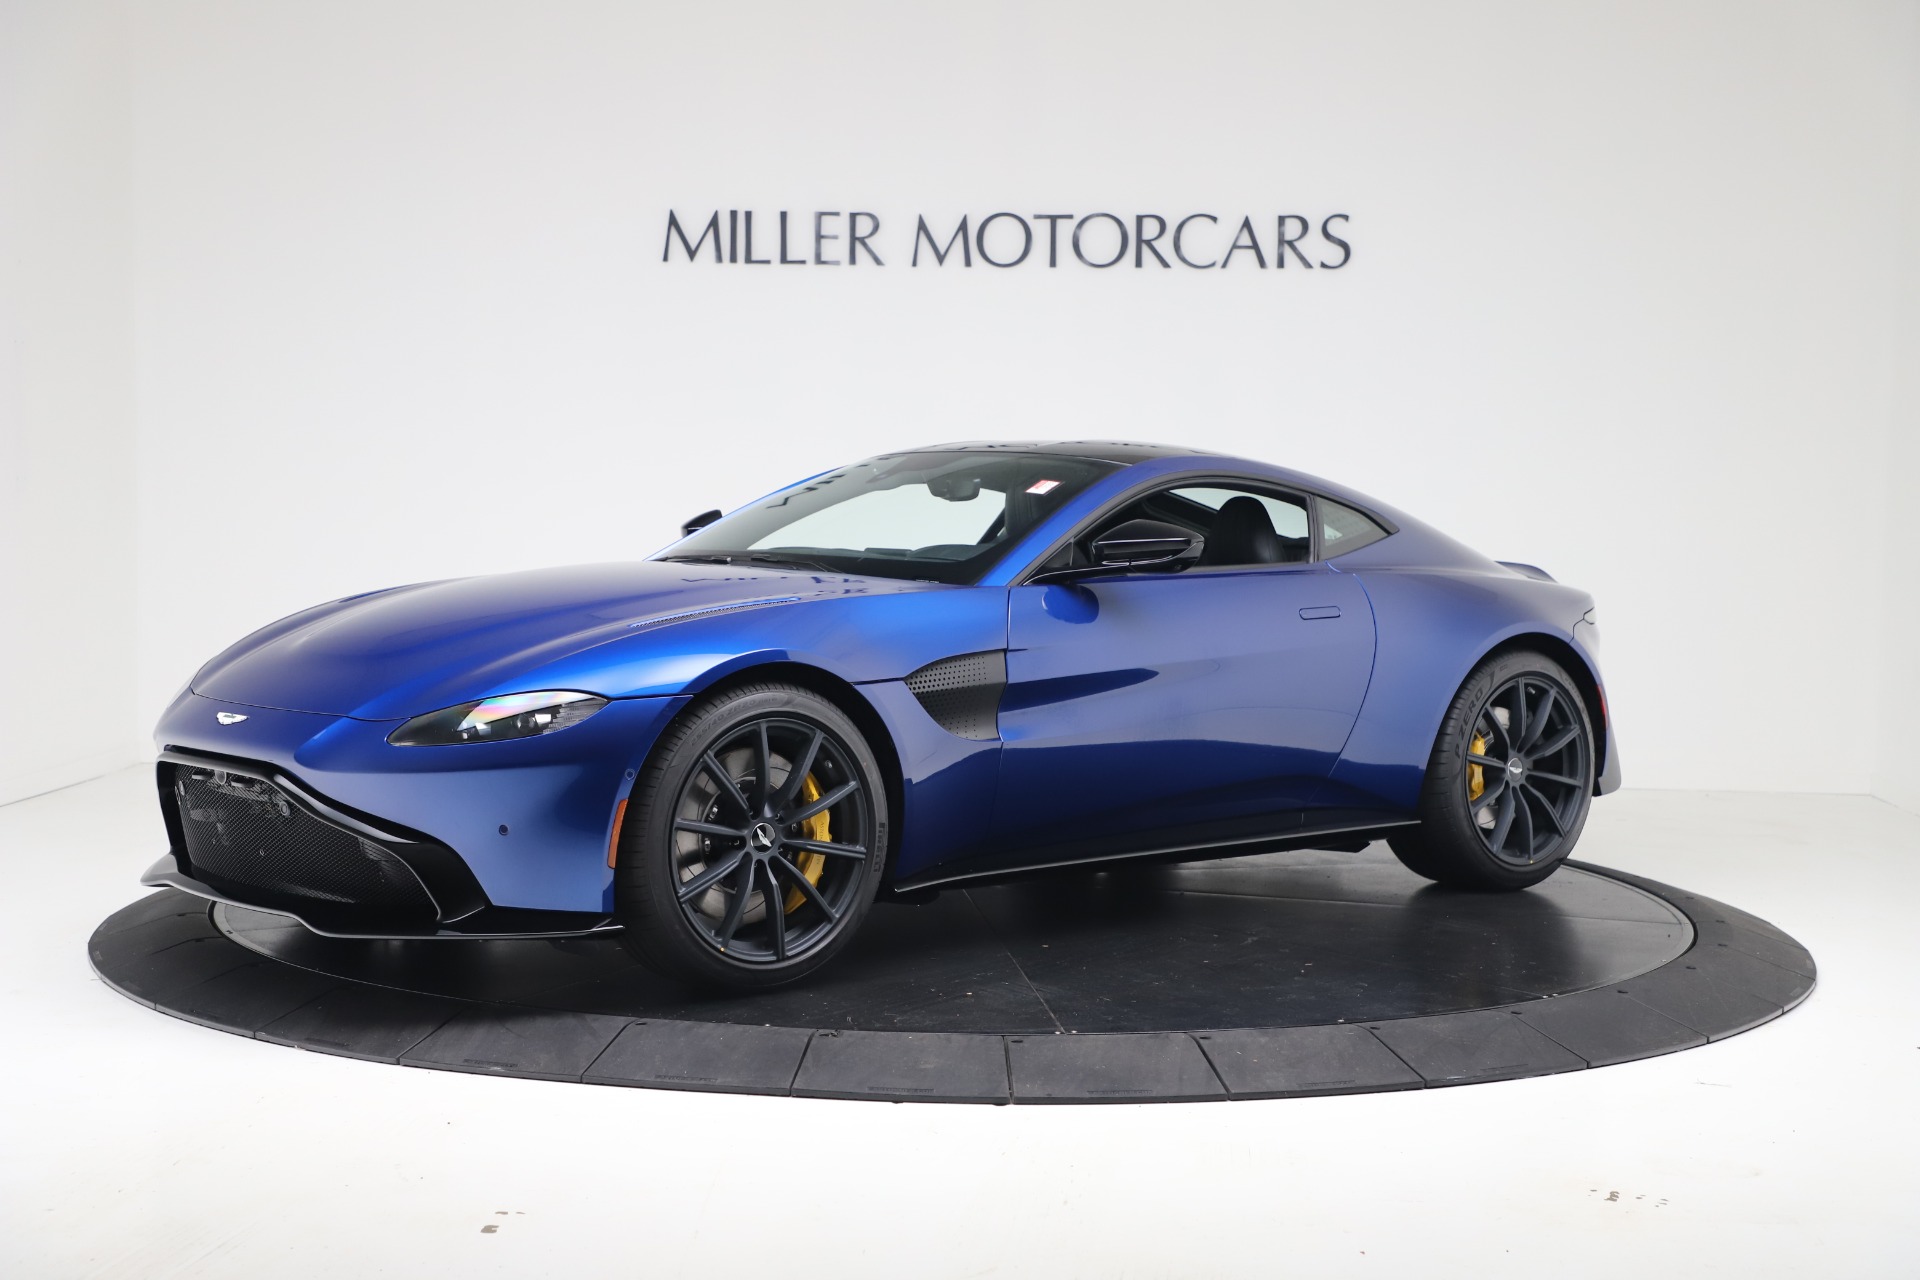 Used 2020 Aston Martin Vantage Coupe for sale Sold at Bentley Greenwich in Greenwich CT 06830 1